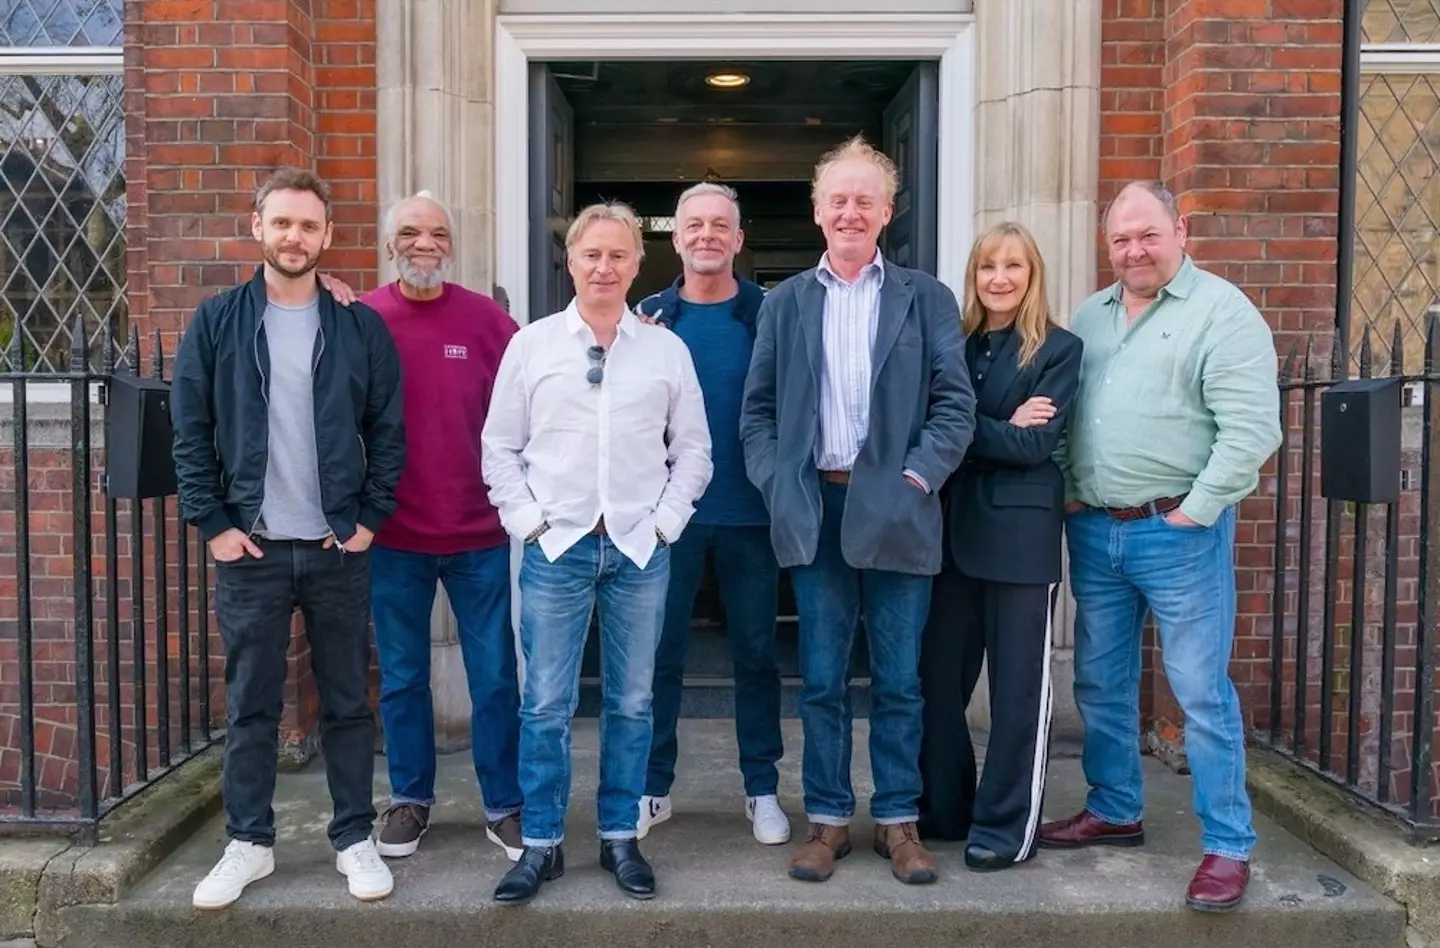 The original cast are returning for The Full Monty remake.